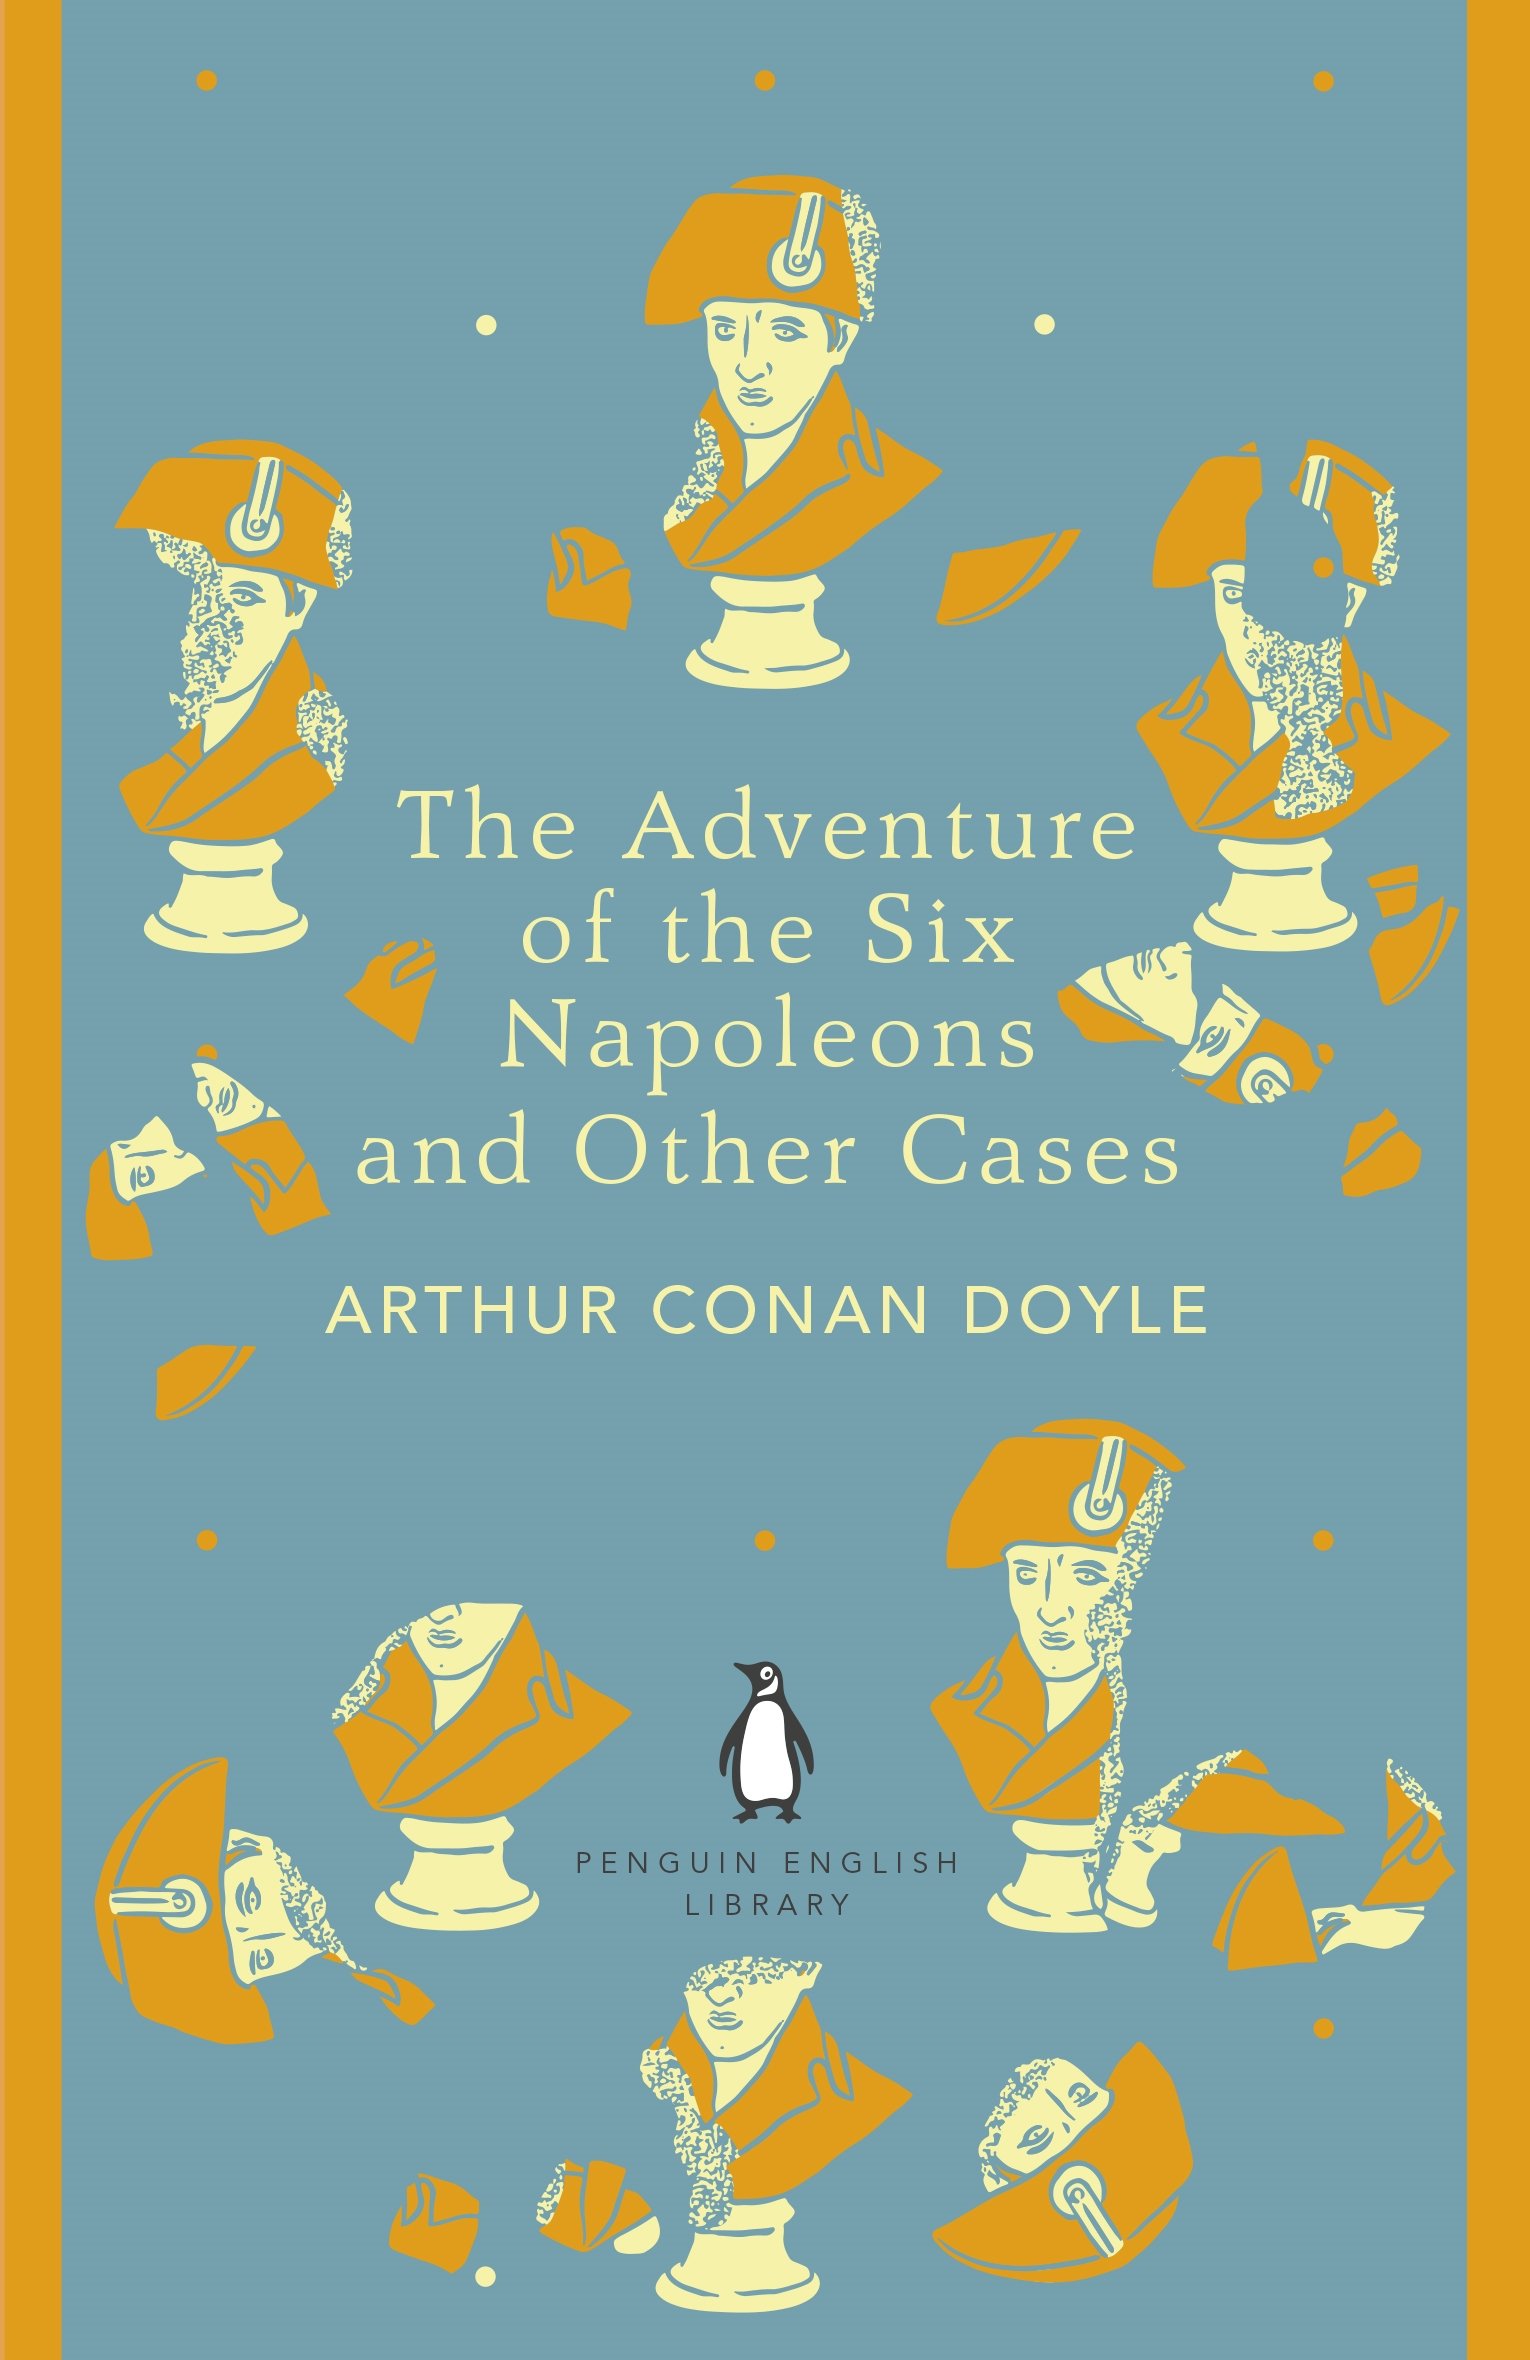 The Adventure of the Six Napoleons and Other Cases | Sir Arthur Conan Doyle